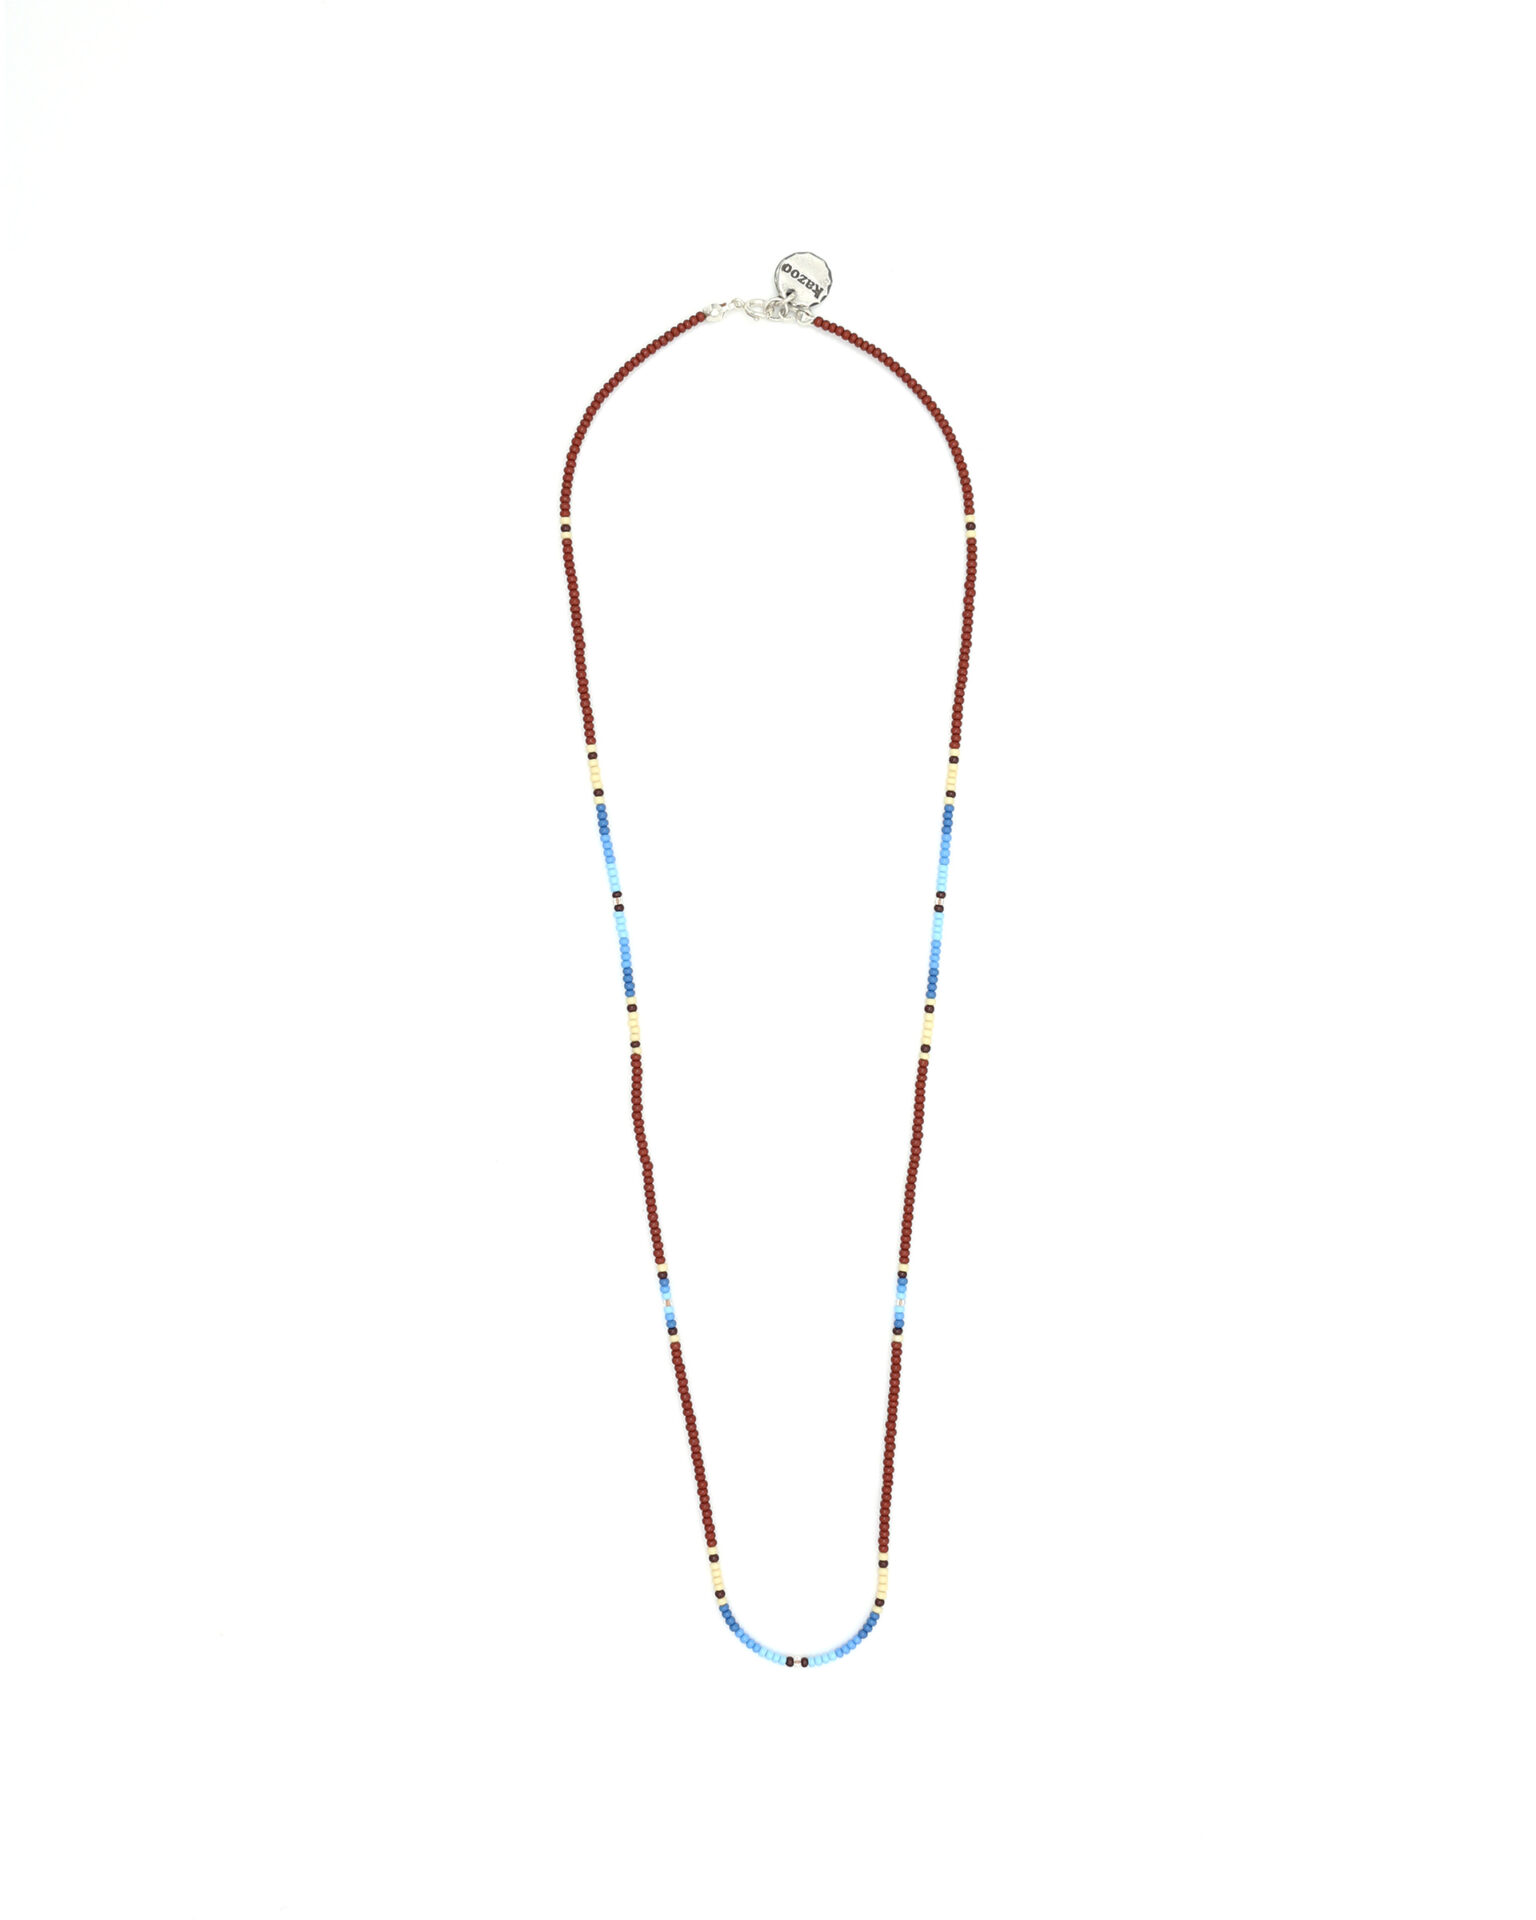 BLUE - MAROON / BEADS NECKLACE